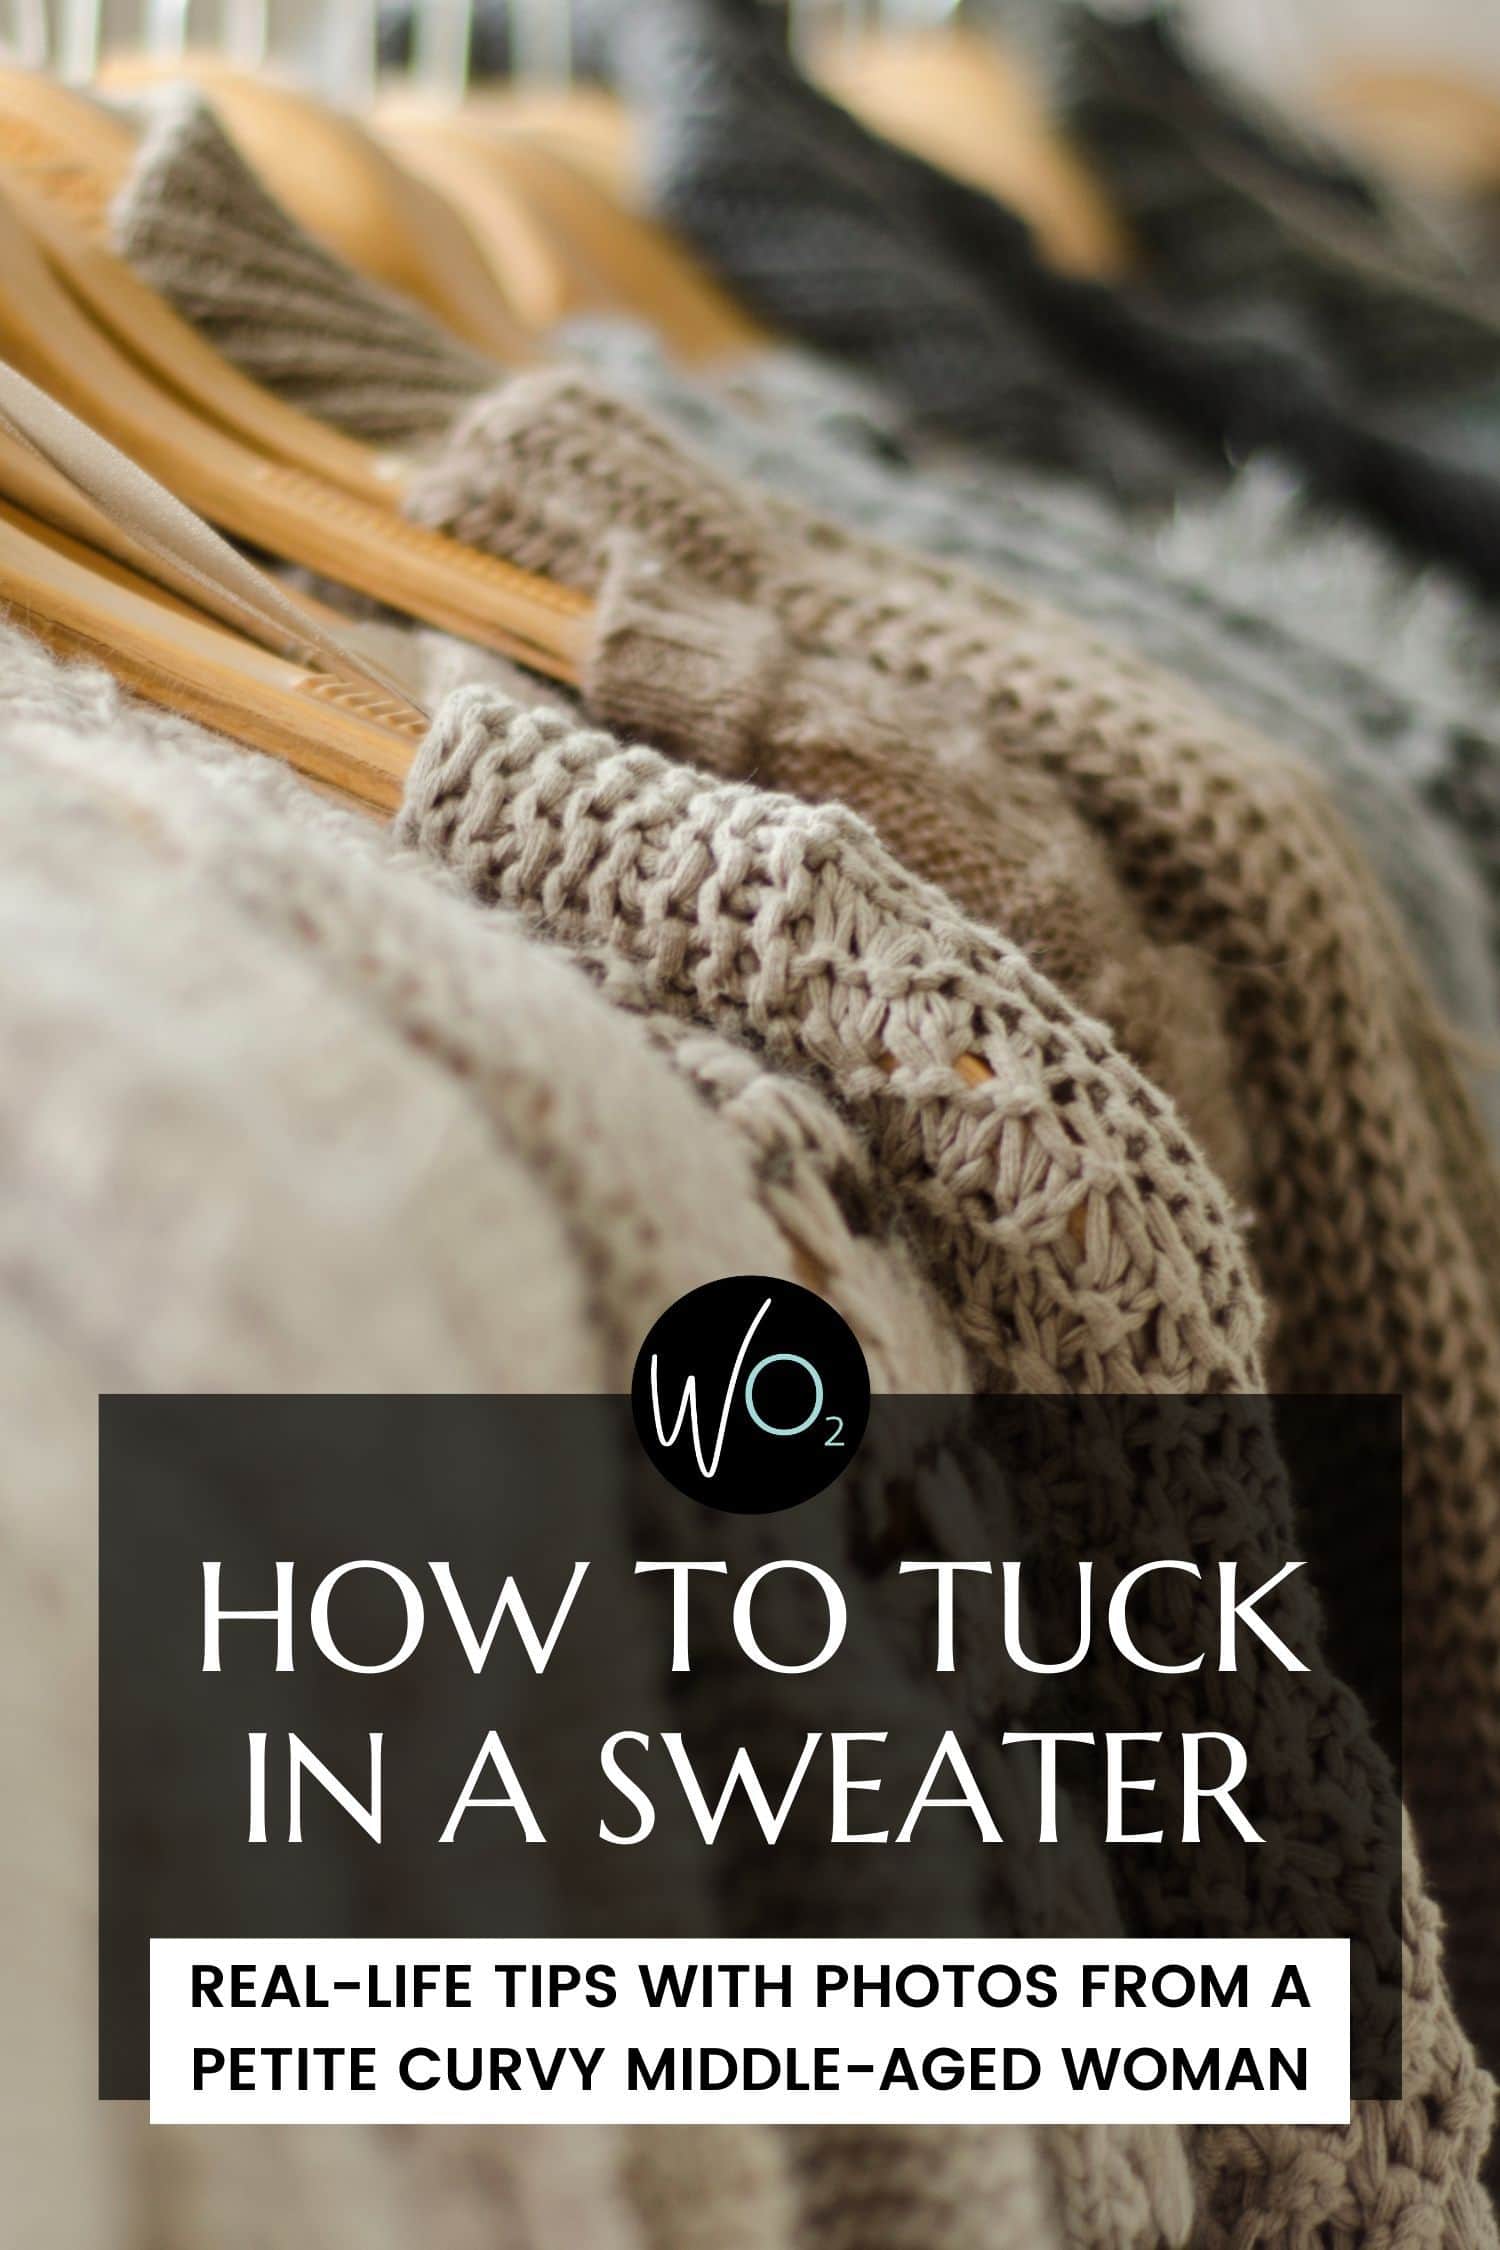 how to tuck in a sweater: real-life tips from an over 40 curvy woman